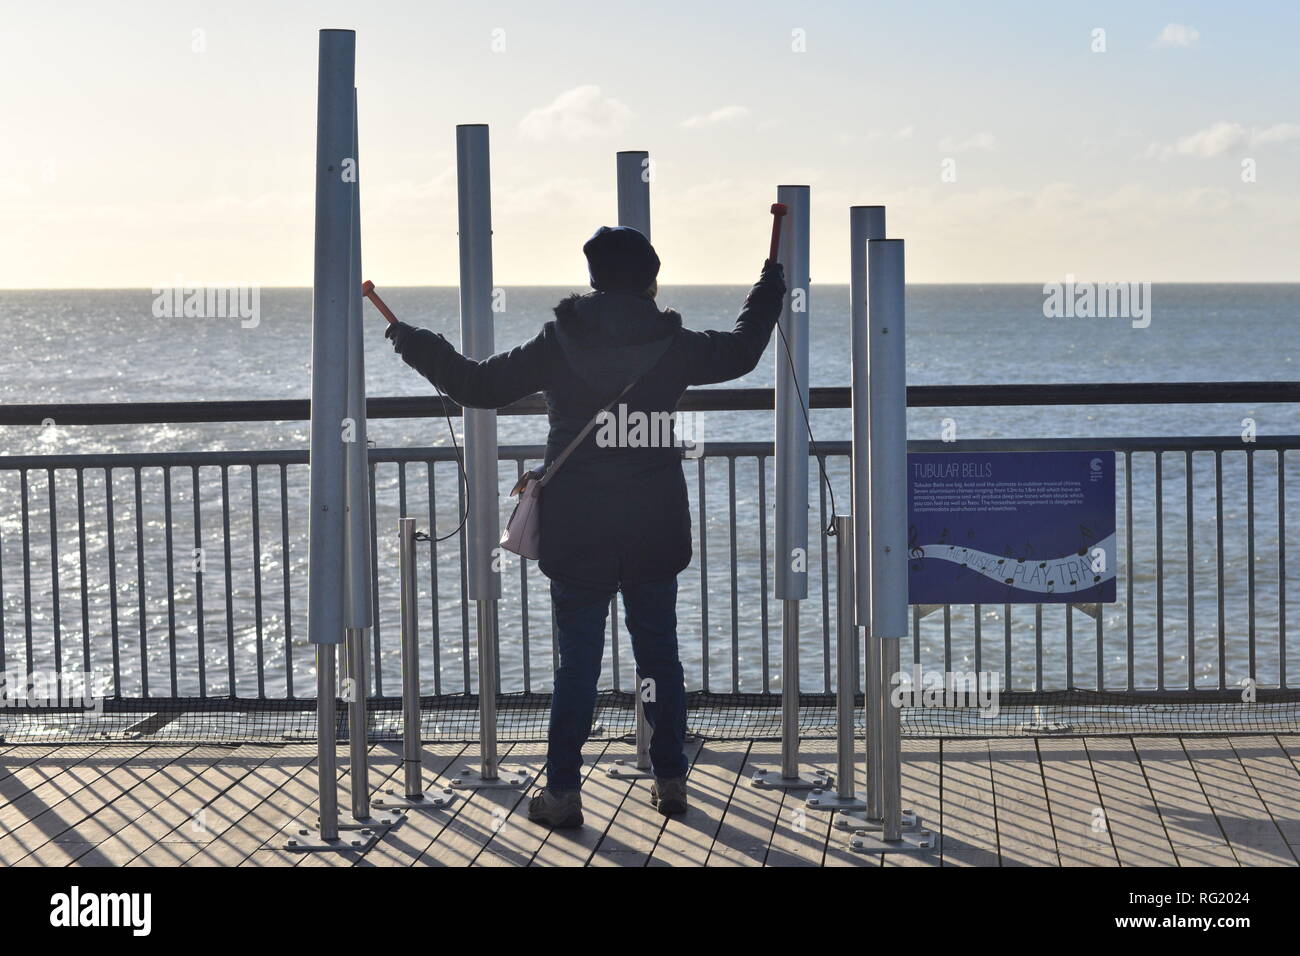 Woman playing tubular bells at the end of the pier, Boscombe, Bournemouth, Dorset, UK, 27th January 2019, Weather: Winter sunshine and windy on the pier. A temperature of just 5 degrees mid-morning is made to feel even colder by the wind chill from strong winds gusting to 50mph. Stock Photo